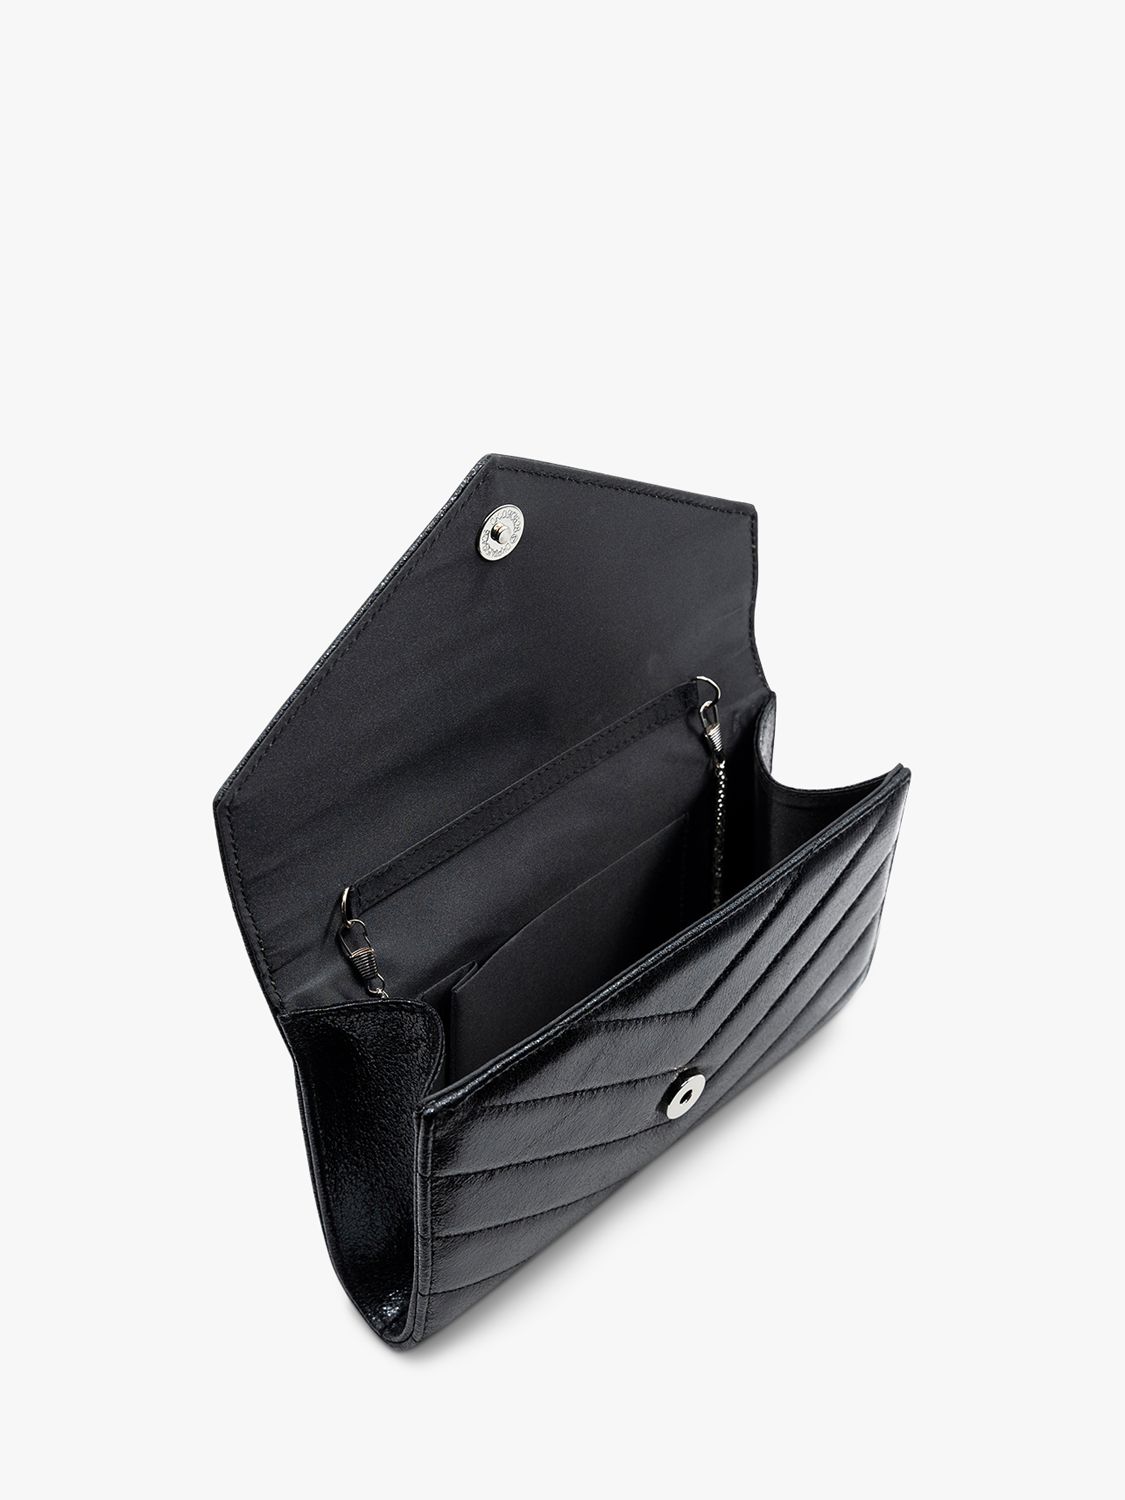 Paradox London Dextra Quilted Clutch Bag, Black at John Lewis & Partners